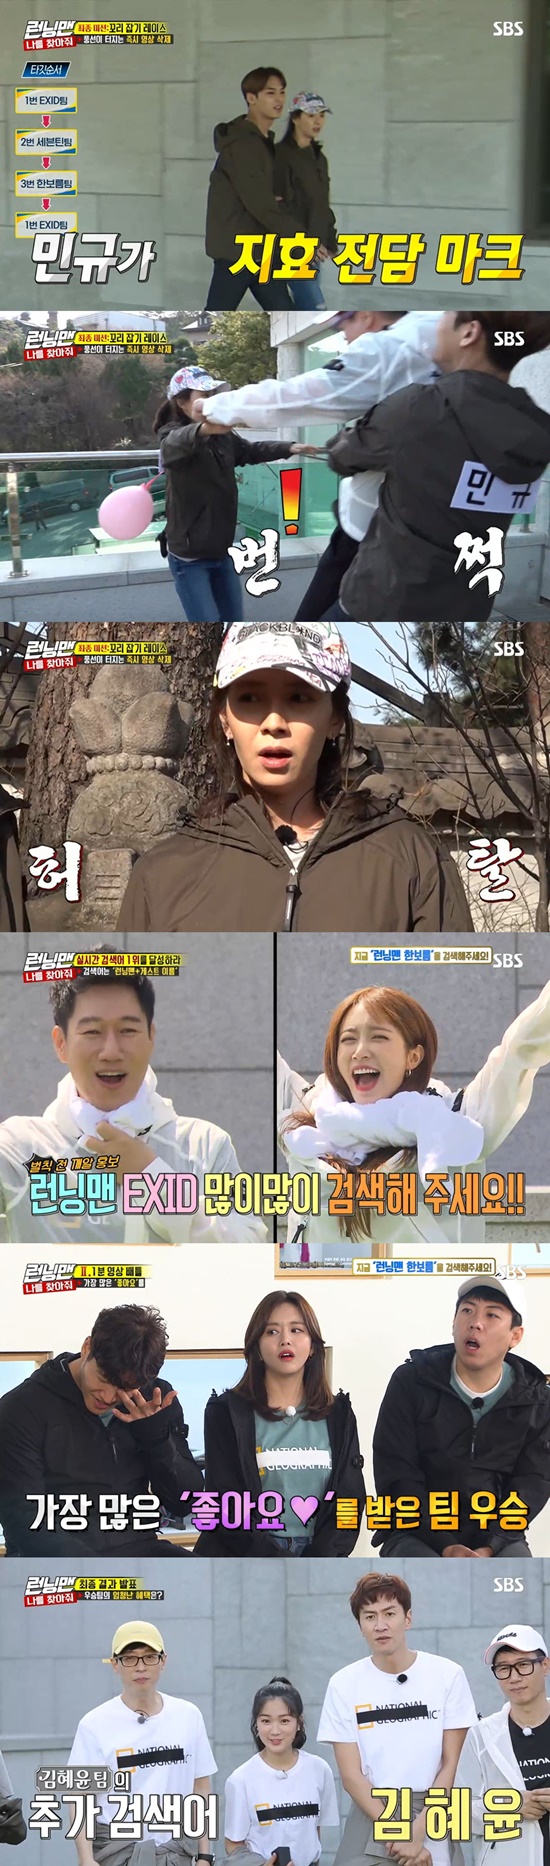 Seventeen Mingyu and Ace Song Ji-hyo became the best one-minute protagonist of Running Man.According to Nielsen Korea, the ratings agency, SBS Running Man, which was broadcast on the 21st, soared to 7.1% of the highest audience rating per minute (based on the audience rating of households in the metropolitan area), and 2049 target audience rating, an important indicator of major advertising officials, ranked first in the same time zone with 4% (based on two viewer ratings).On this day, Seventeens victory and Mingyu, EXIDs Hani and Solji, actor Kim Hye-yoon, and actor Han Bo-reum appeared as guests and played the first real-time search word war.Seventeen teamed up with Song Ji-hyo and Jeon So-min, Kim Hye-yoon teamed up with Yoo Jae-Suk and Kwangsoo, and Han Bo-reum teamed up with Kim Jong-kook and Yang Se-chan.EXID was in a boat with Ji Suk-jin and Haha; they had to go through three rounds in total to achieve the top spot in real-time search terms before starting the game that won.The first round was the number one chart of those days. The last team was baptized with water bombs, with the number one game on the popular song chart from 1993 to 2018.Kim Hye-yoon went on a quiz with his dance skills hidden to avoid water bombs.However, Yoo Jae-Suk and Kwangsoo laughed at Kim Hye-yoon, saying, I should not have told you if I could not, and I thought I was doing well.At the end of the battle, the Han Bo-reum team became the winner of the chart of those days and benefited from the Running Man Han Bo-reum phrase at the top of the screen.The second team was the Seventeen team, the third team was the Kim Hye-yoon team, and the water cannon penalty went to the last EXID team.The second round was a battle in which the team that produced a one-minute promotional video for each team won the most likes on the Running Man official SNS.Kim Hye-yoons team has featured a variety of elements that attract the attention of netizens, from Jennys Solo choreography to the acting of the example in SKY Castle.The EXID team produced direct-cam videos featuring choreography and anti-war fun tailored to Hot Pink, and the Seventeen team challenged the Onana dance.The Han Bo-reum team used Kim Jong-kooks golden connections to capture the instant phone connections with the best stars from Jackson to Ryu Hyun-jin of GOT7.Finally, the tail-catching race started when the promotional video was deleted, and the promotional video posted on the SNS was deleted as soon as the balloon of the tail bursts, and the number of likes will be finished.Kim Hye-yoons team was the first to be eliminated by the Han Bo-reum team after the balloon was removed.Song Ji-hyo, left alone, was in Danger where the balloon would burst with the appearance of Ji Suk-jin, but with the help of Seventeen Mingyu, he escaped Danger.However, Haha joined the team and went to catch Song Ji-hyo, and the two teams played front.Mingyu defended Song Ji-hyo by blocking Ji Suk-jin and Haha, but Song Ji-hyos balloon was caught in the branches and was dropped.The scene recorded the highest audience rating of 7.1% per minute, accounting for the best one minute.The final winner of the tail-catching race was won by the Han Bo-reum team.However, Kim Hye-yoon teams video, which was first deleted due to the first elimination of tail-catching, won the highest number of likes of 23061.The winning Kim Hye-yoon team provided another search word in addition to Running Man Kim Hye-yoon.The final winner will be determined by counting real-time search terms until midnight.Photo = SBS Broadcasting Screen